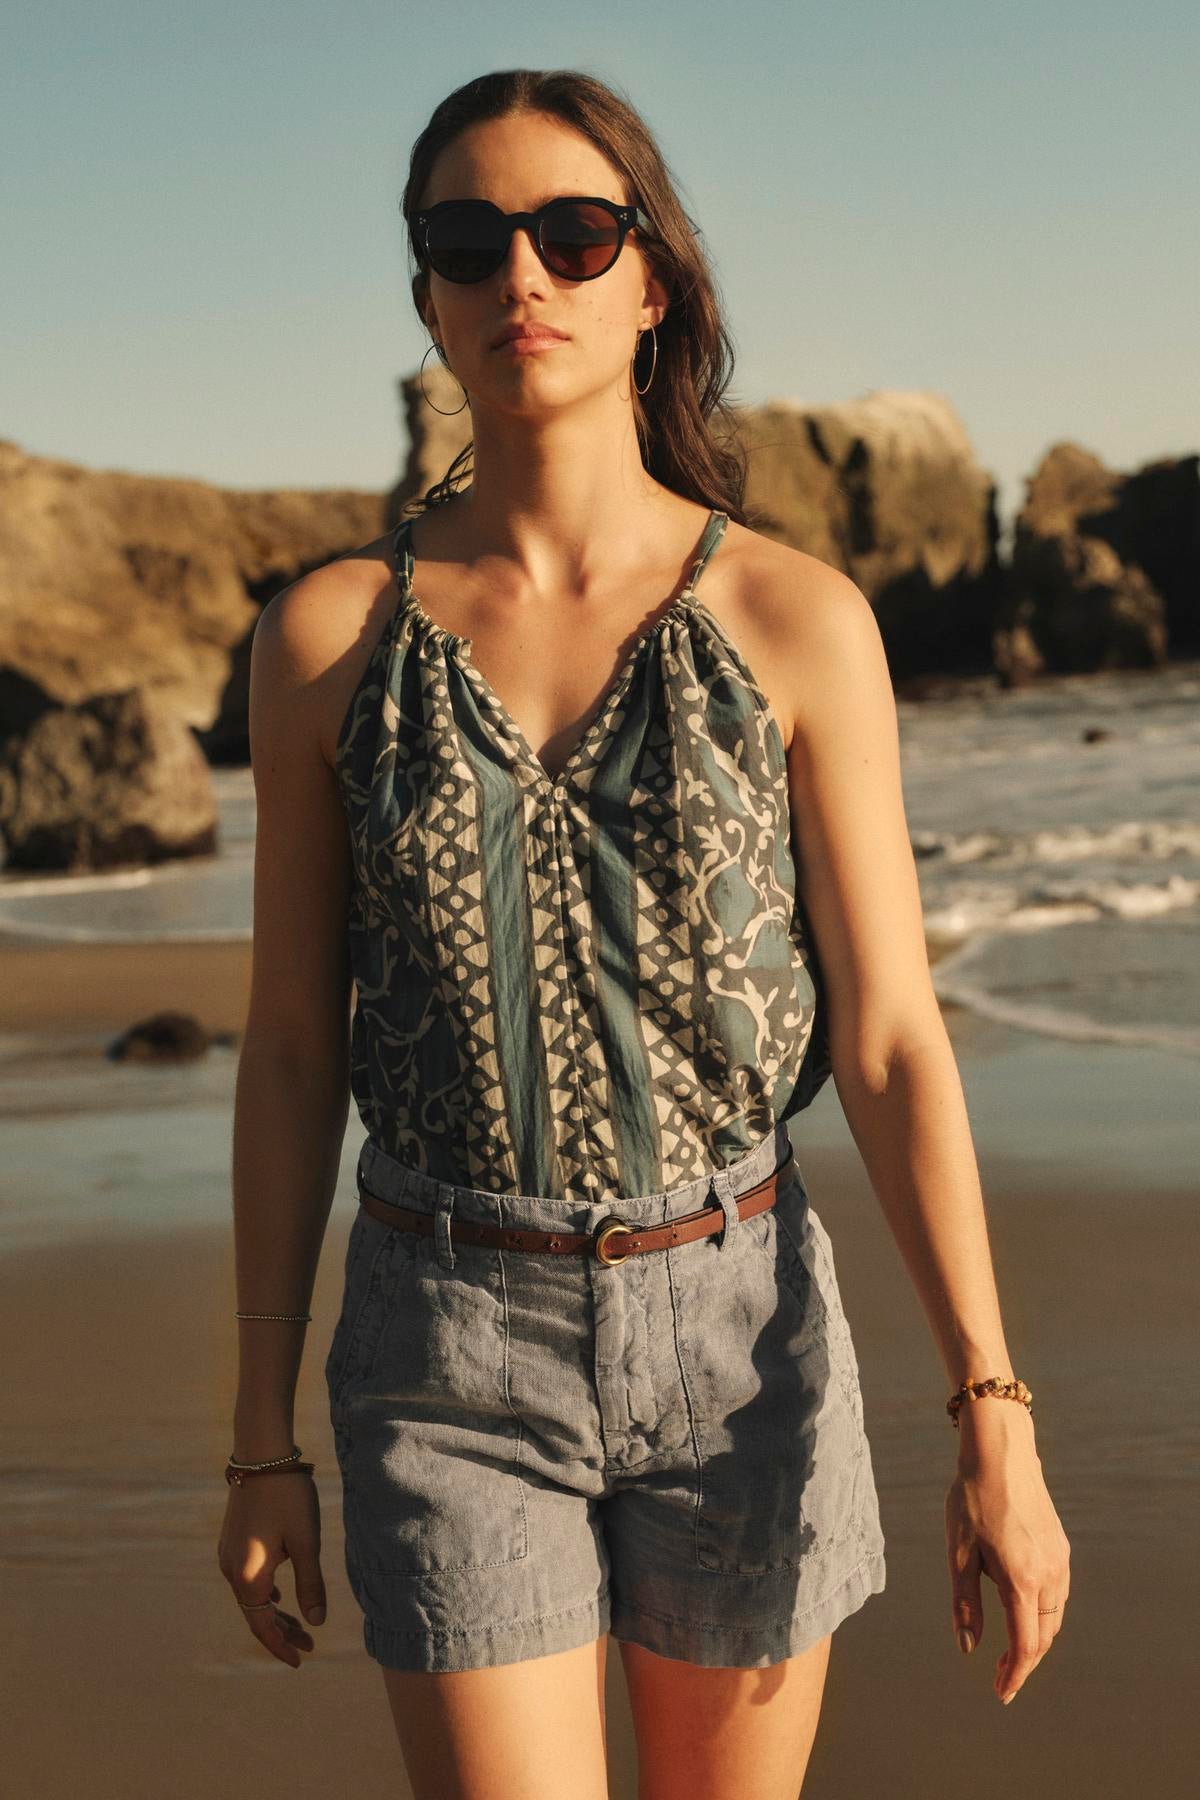 A woman in sunglasses, wearing a Velvet by Graham & Spencer RHEA TANK TOP with a v-neckline and denim shorts, stands on a sandy beach with cliffs in the background.-36918810214593